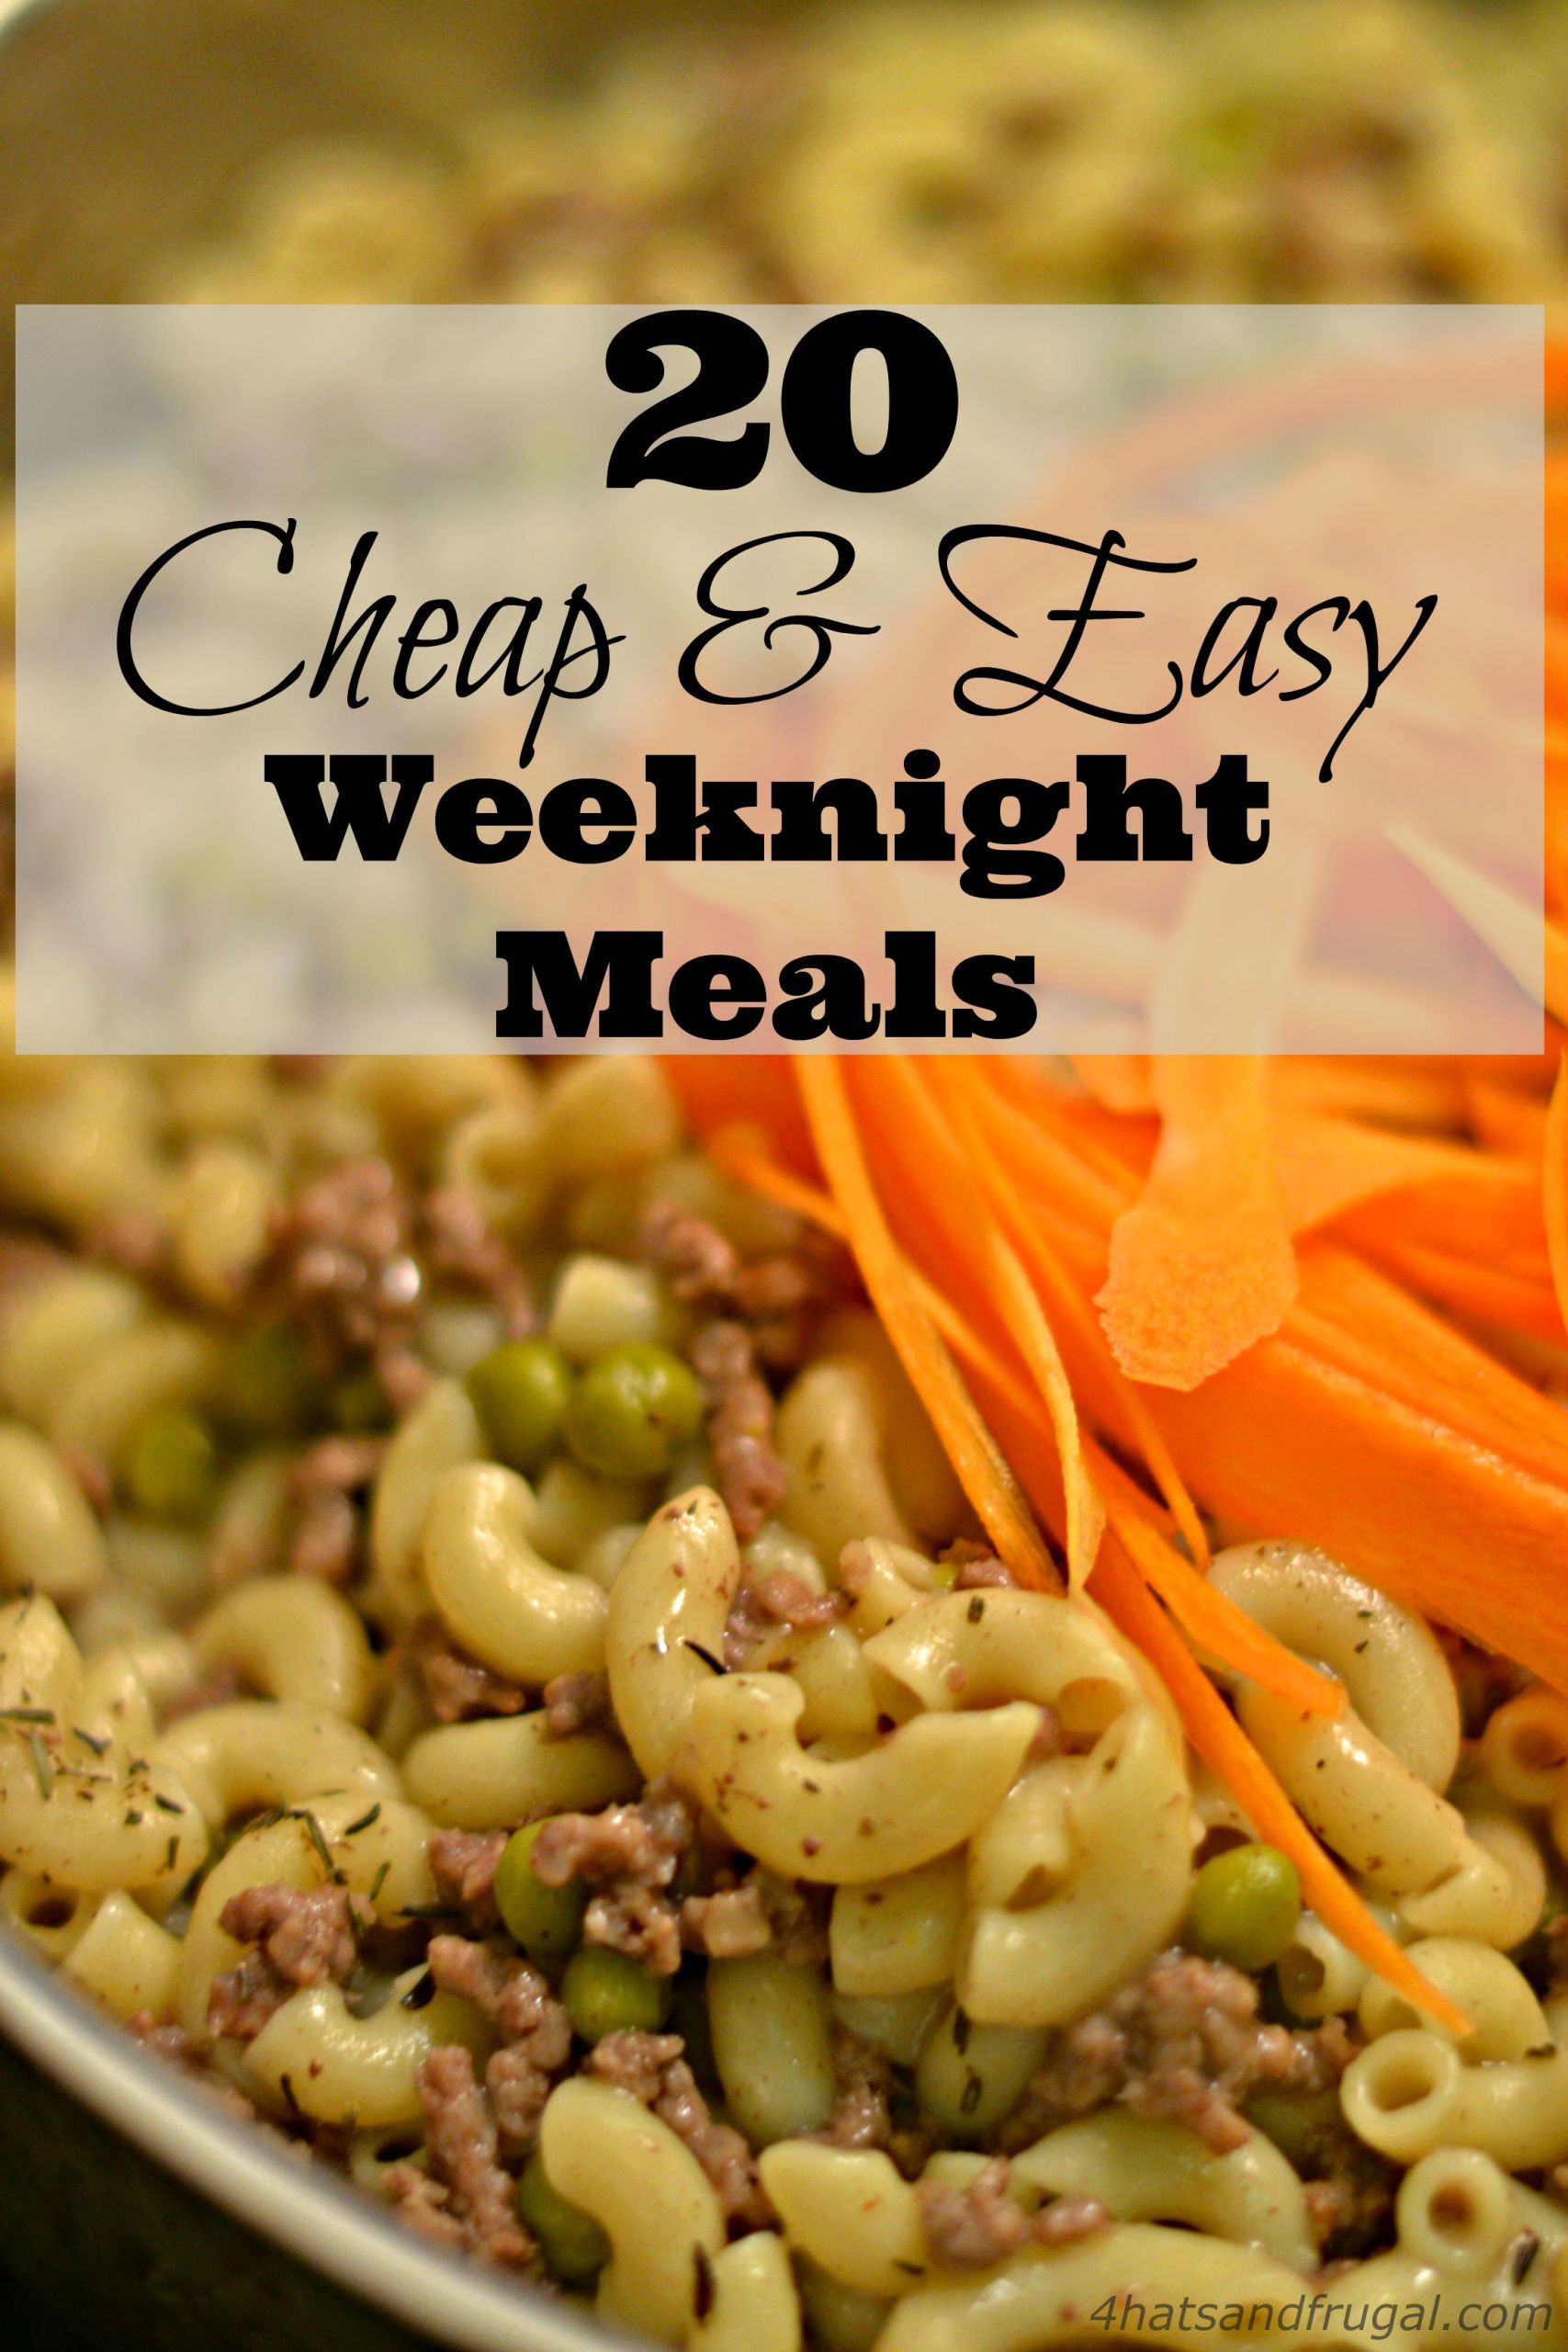 Cheap Dinner Ideas For Family
 20 Cheap & Easy Weeknight Meals 4 Hats and Frugal